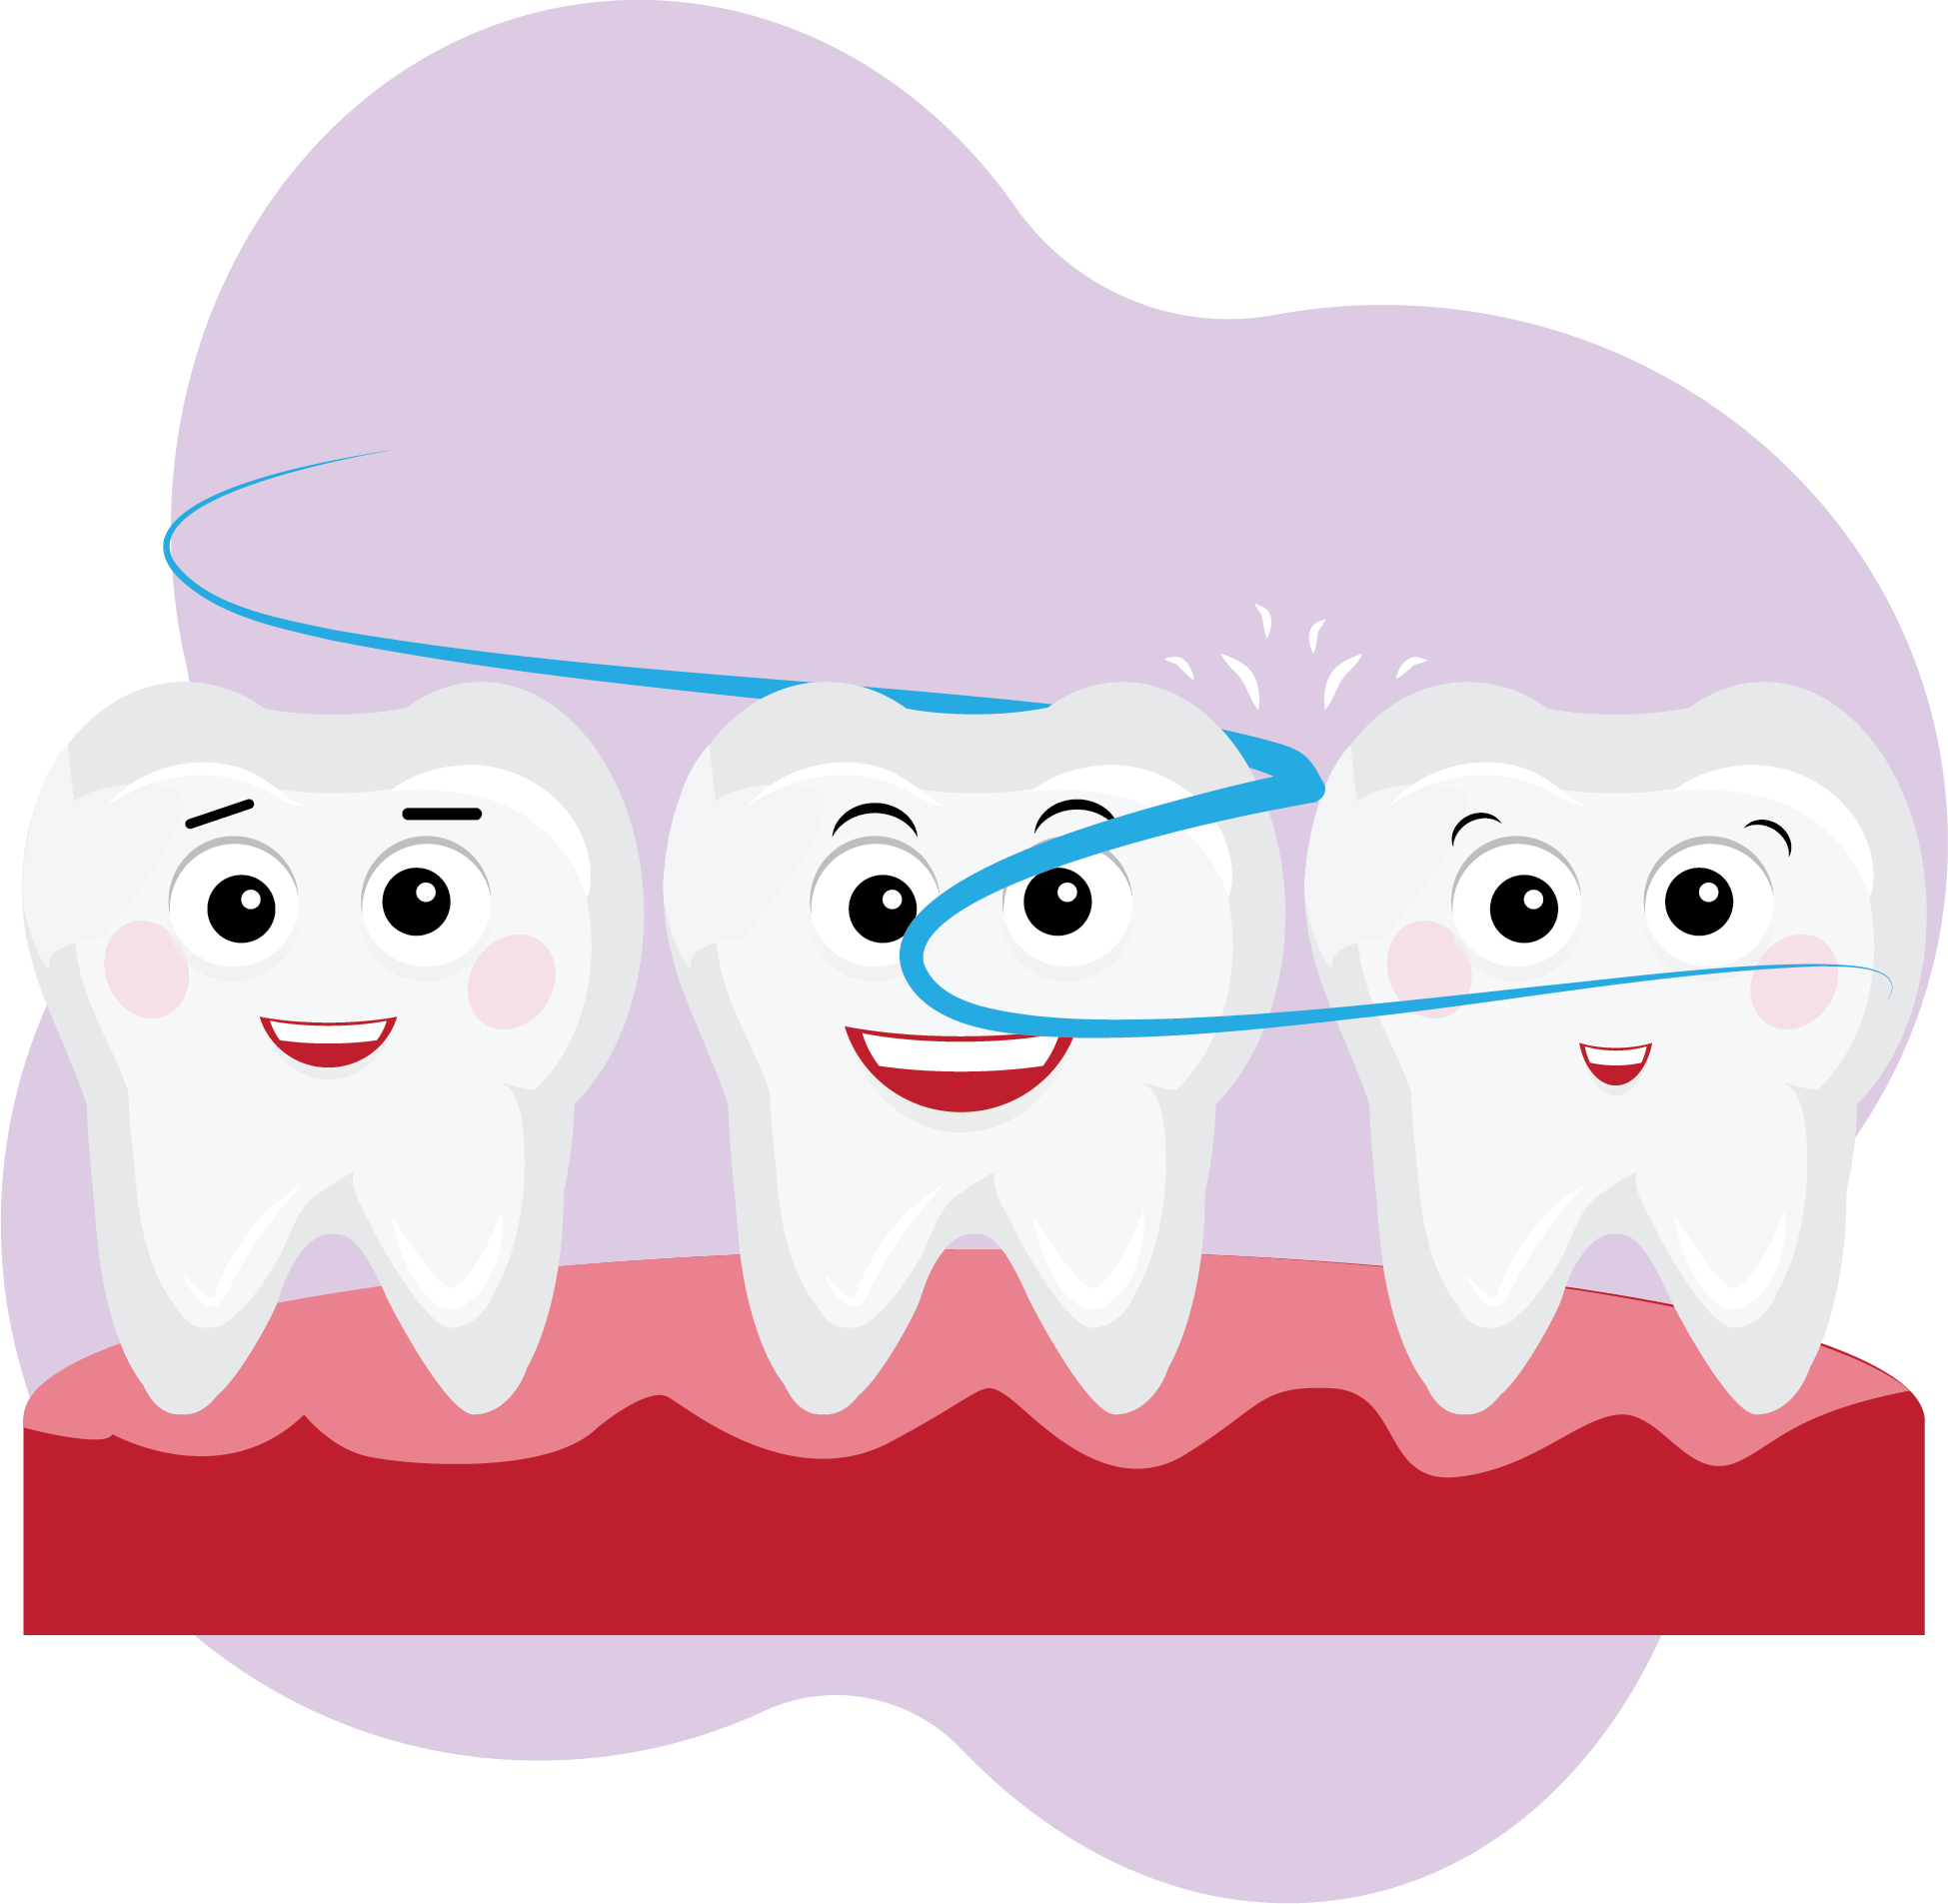 Illustration of 3 teeth smiling and wrapped in floss